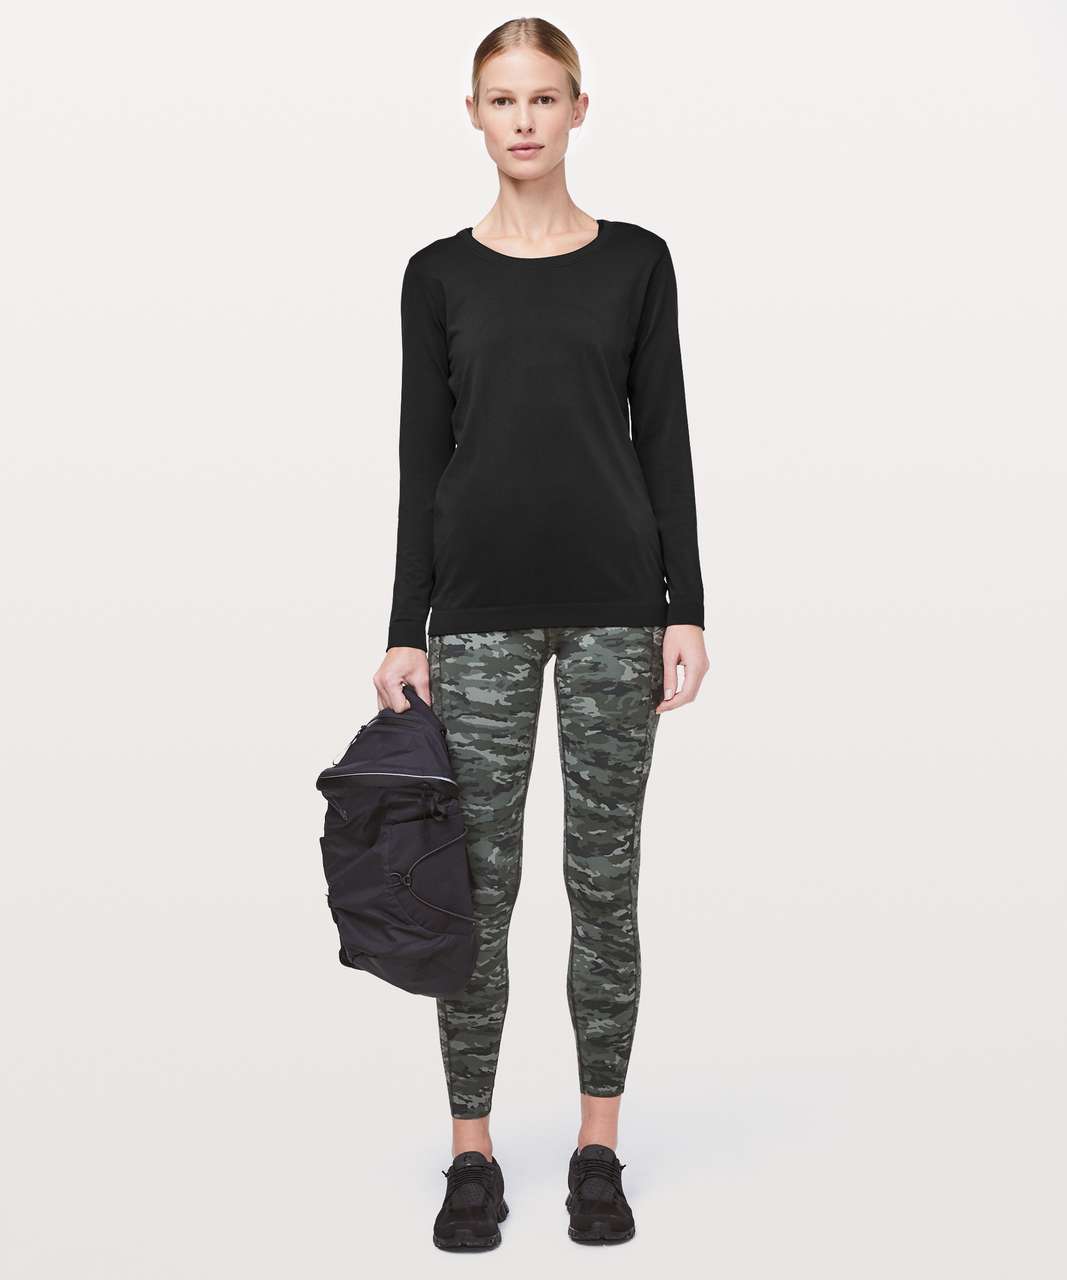 Lululemon Swiftly Tech Long Sleeve (Breeze) *Relaxed Fit - Black / Black (Second Release)